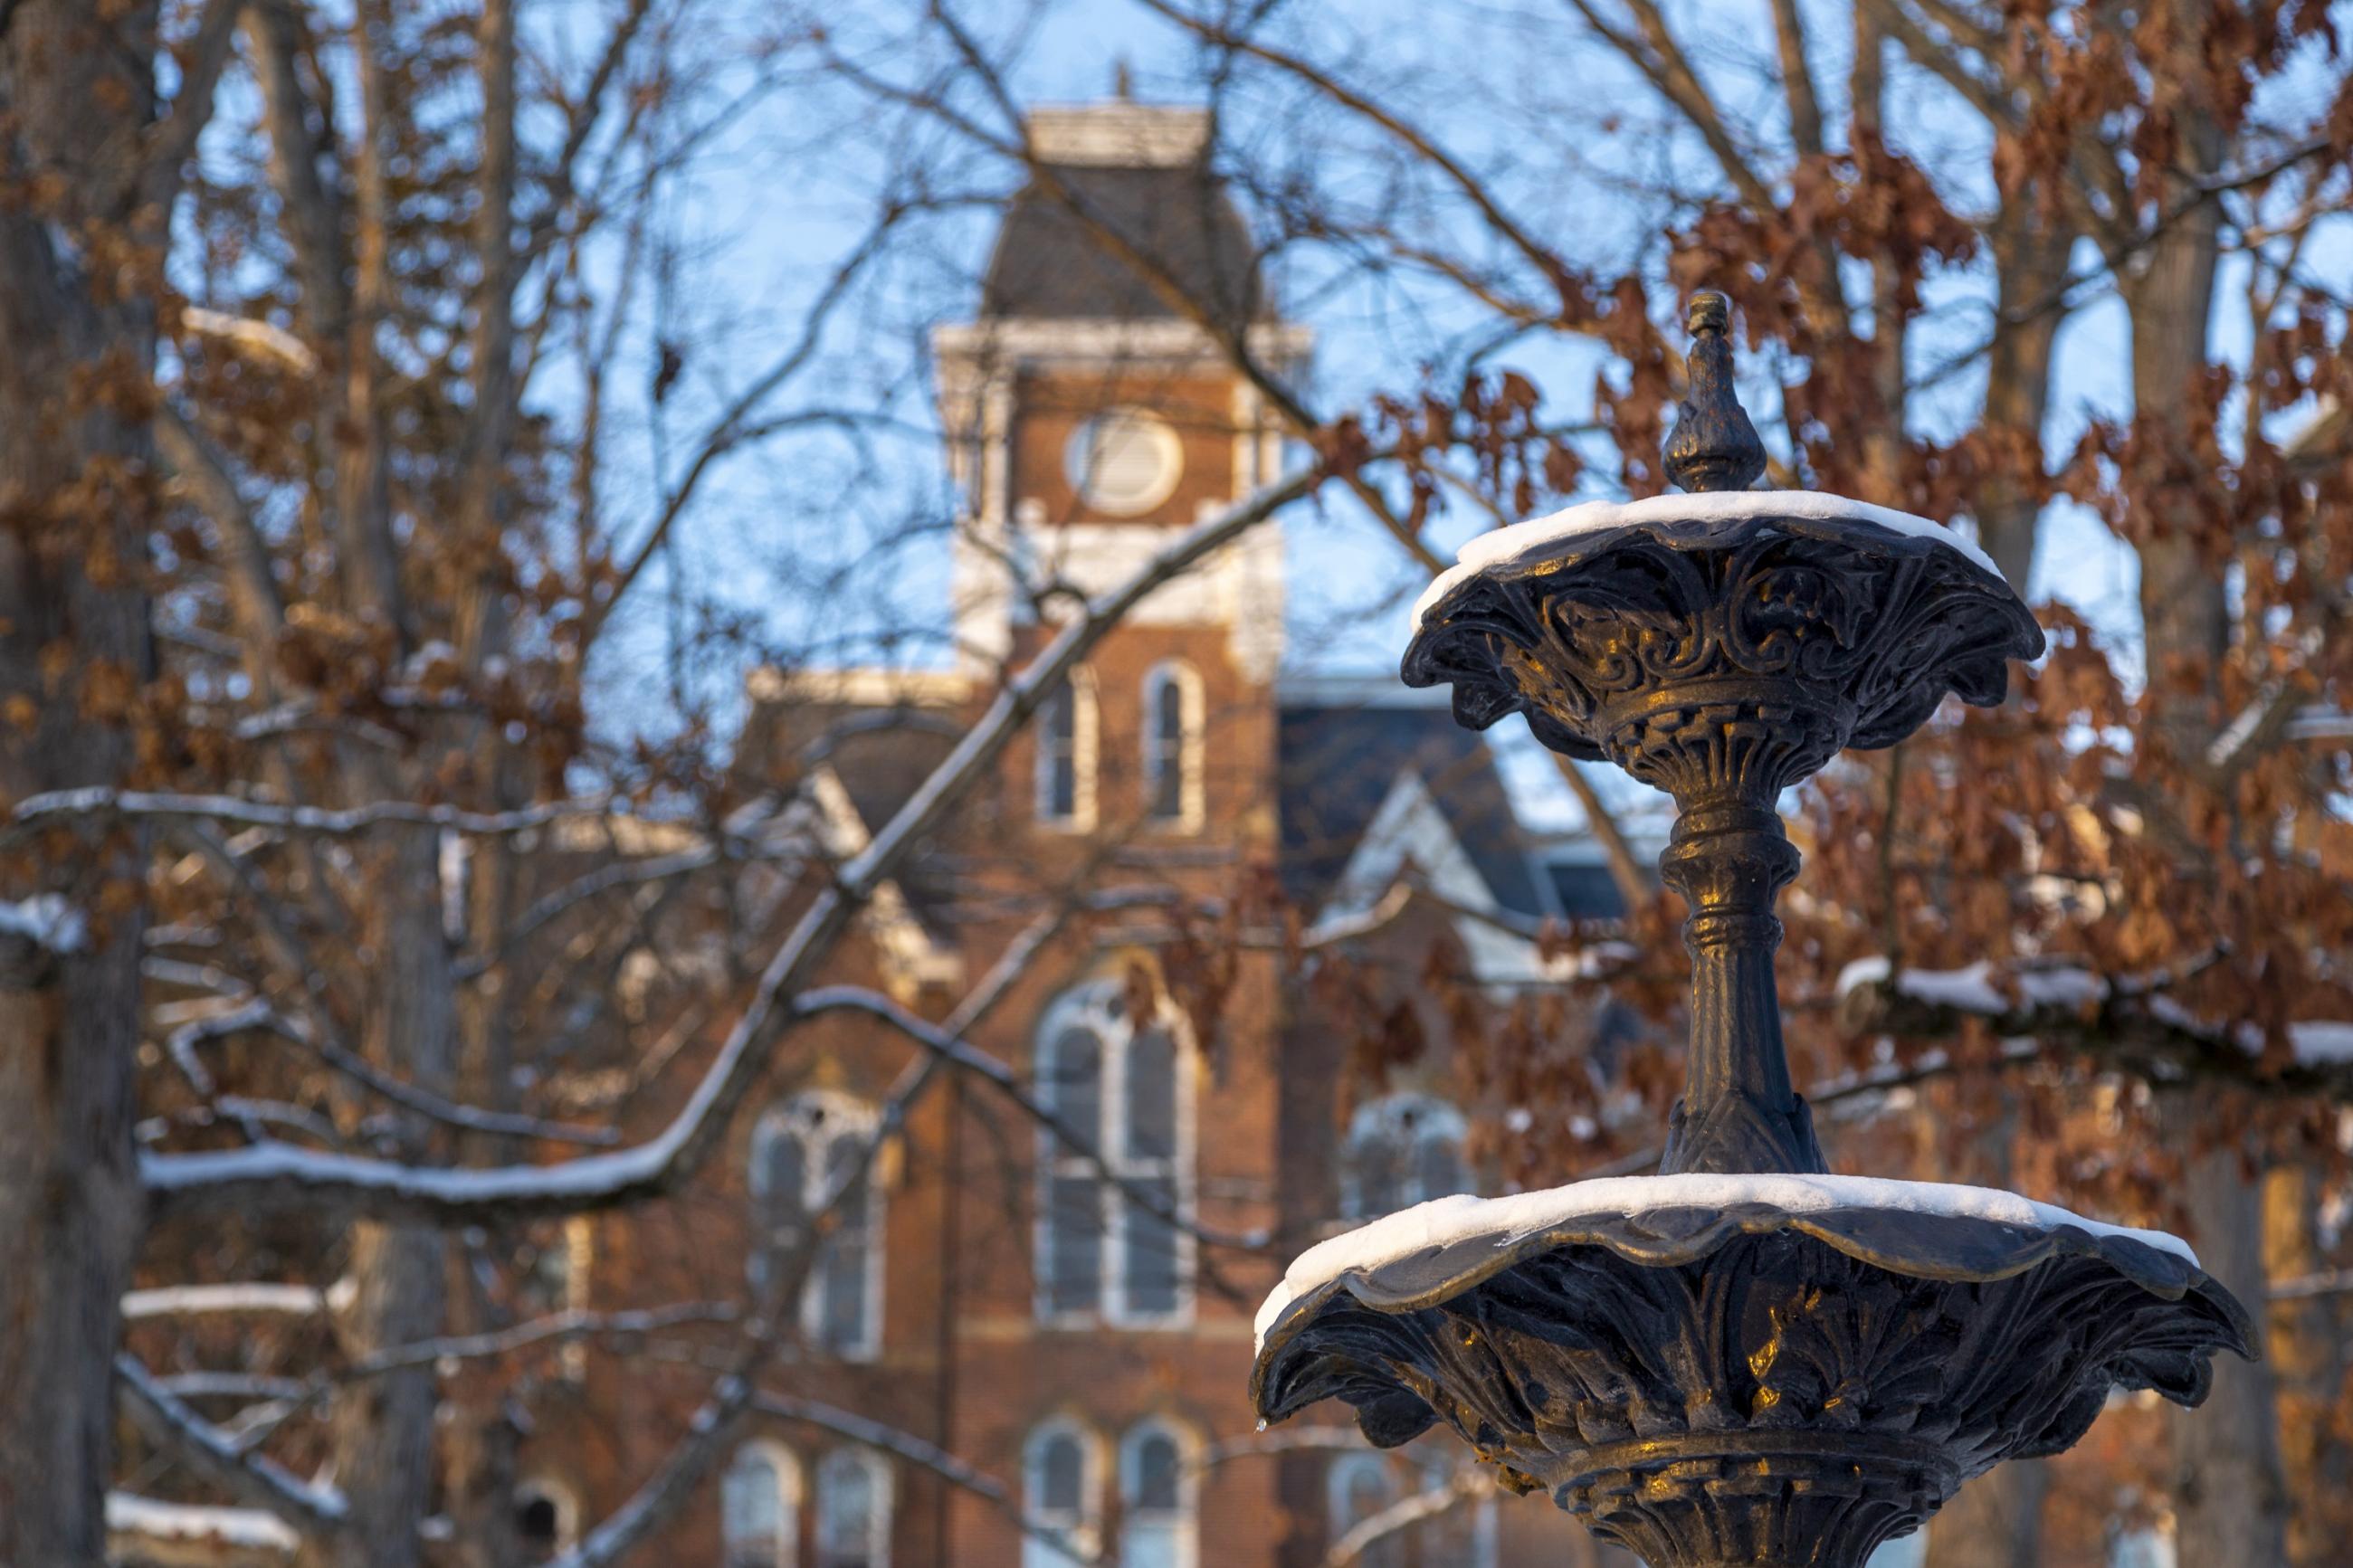 Miller Hall in the winter